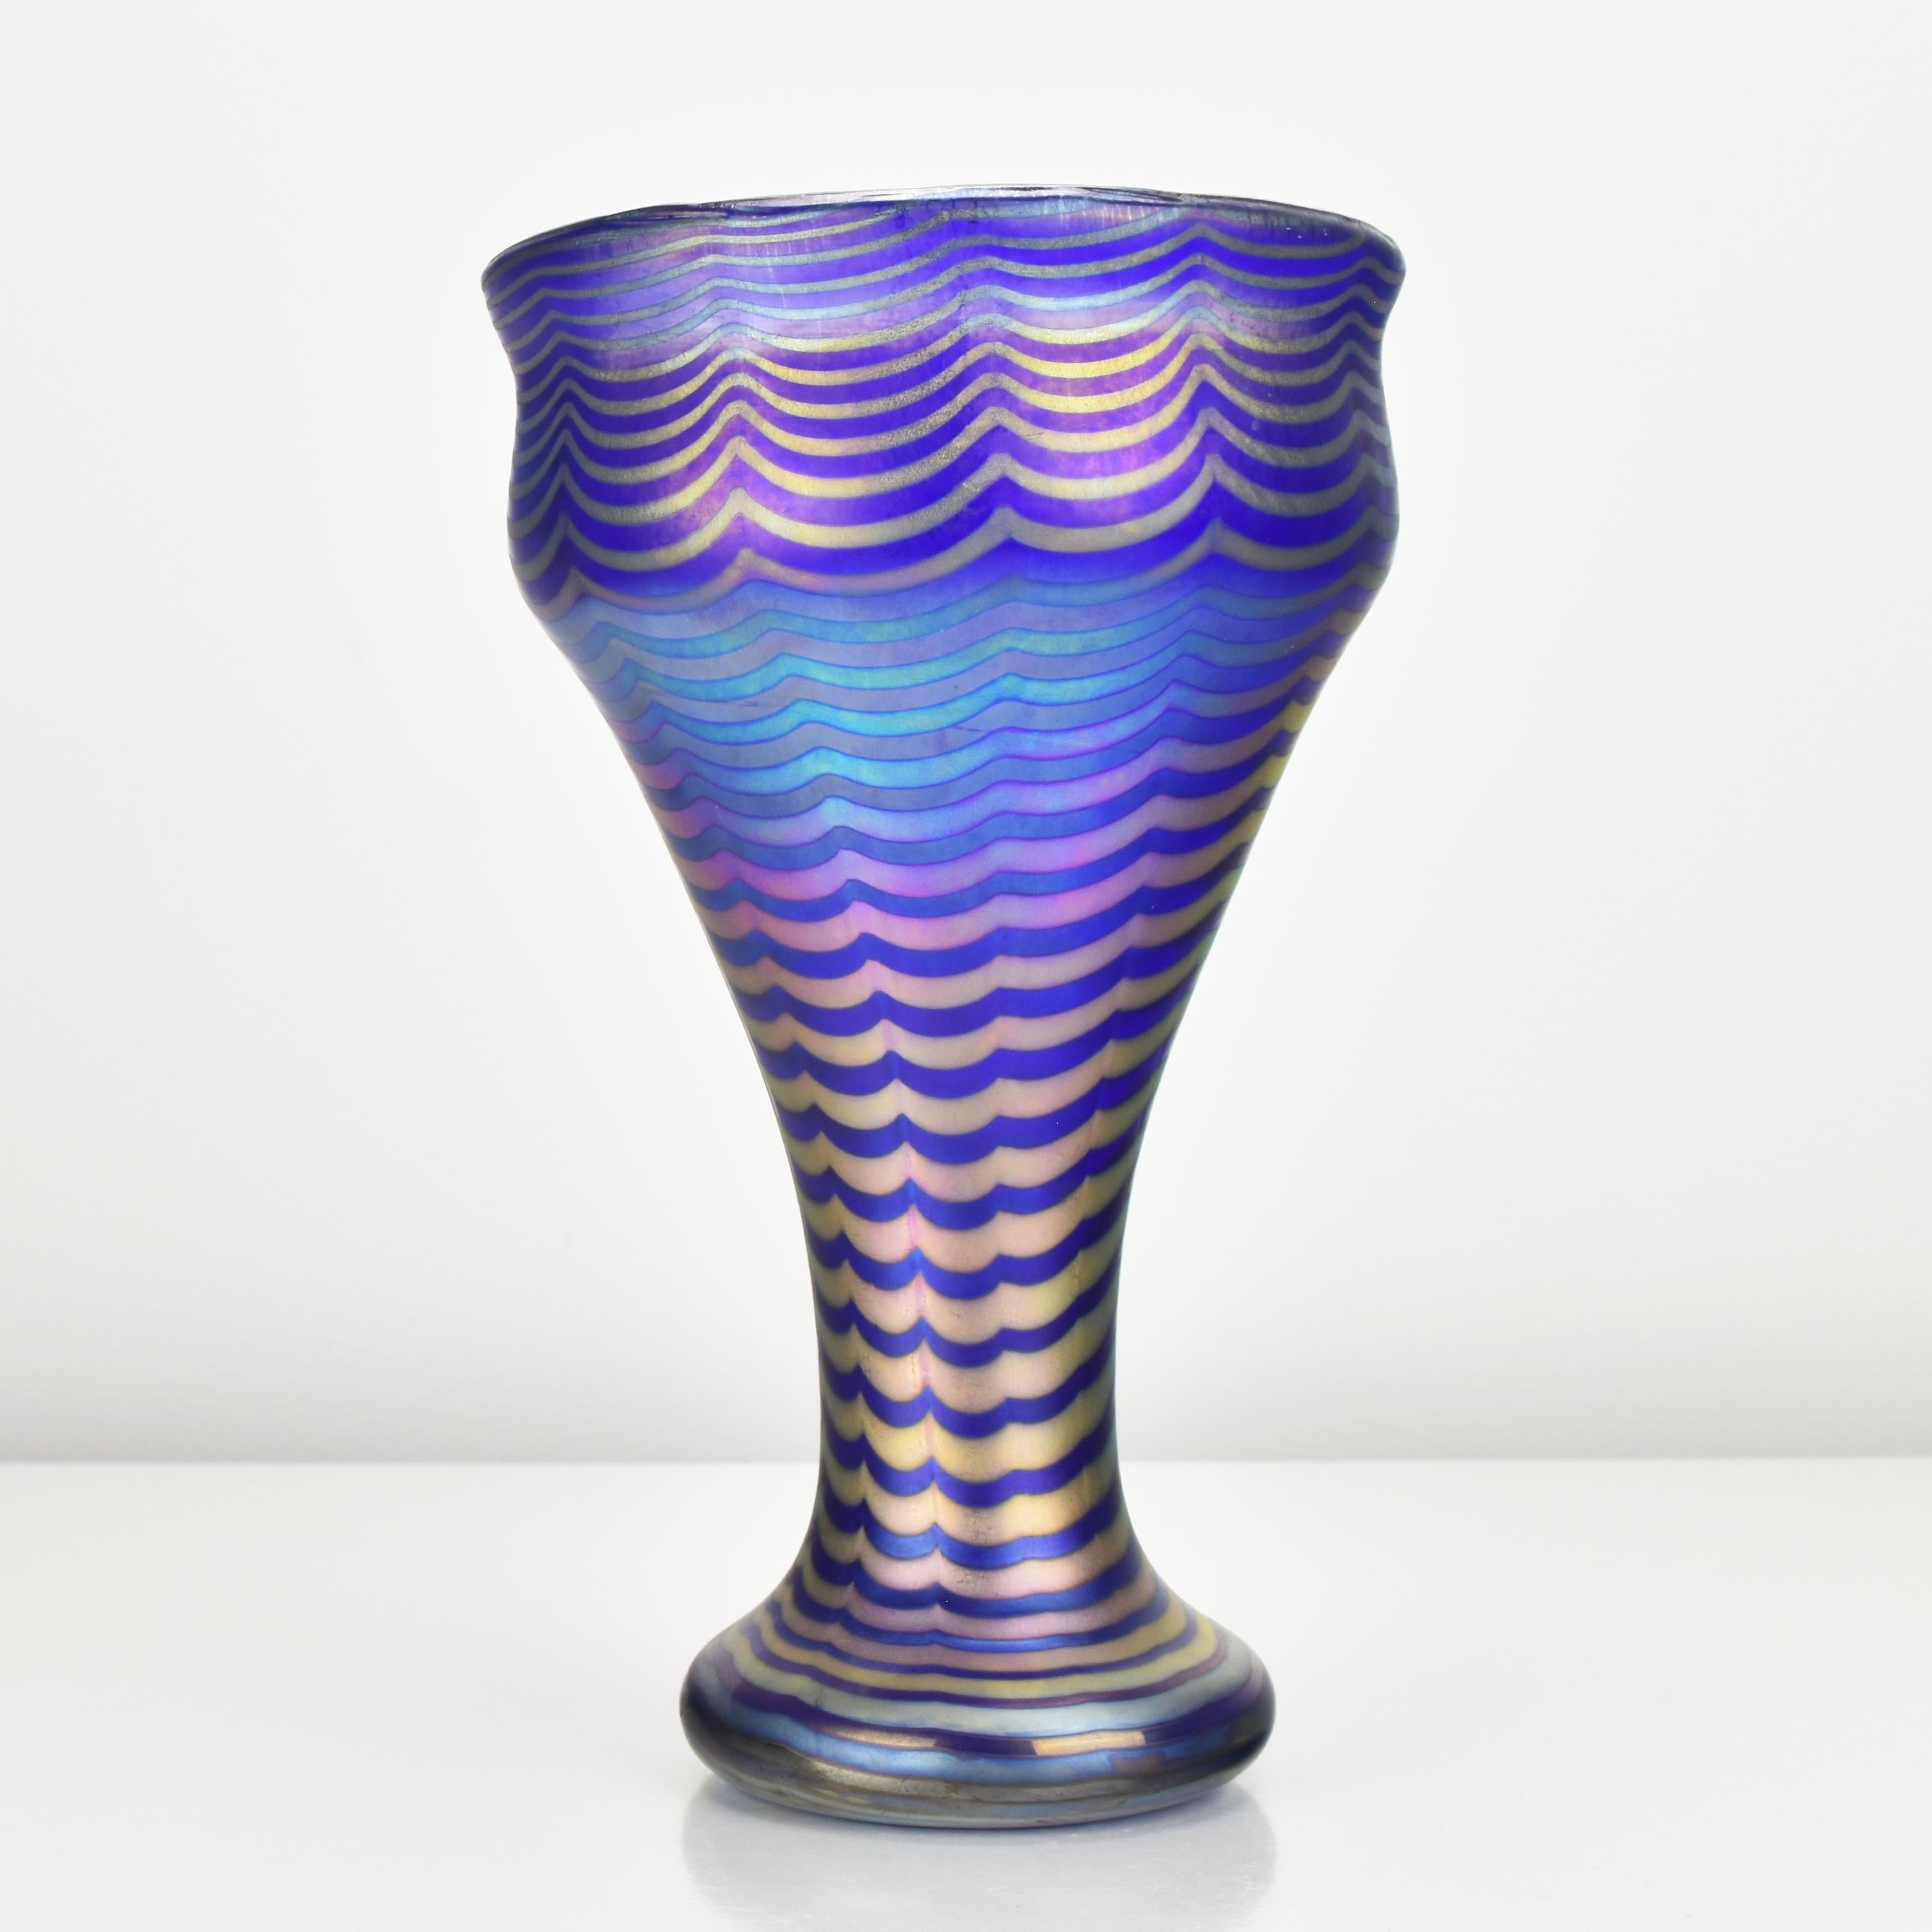 Antique Art Nouveau chalice shaped art glass vase created by the Loetz glassworks company, which was active during the late 19th and early 20th centuries, this vase represents a prime example of their artistic mastery.

The vase features a cobalt